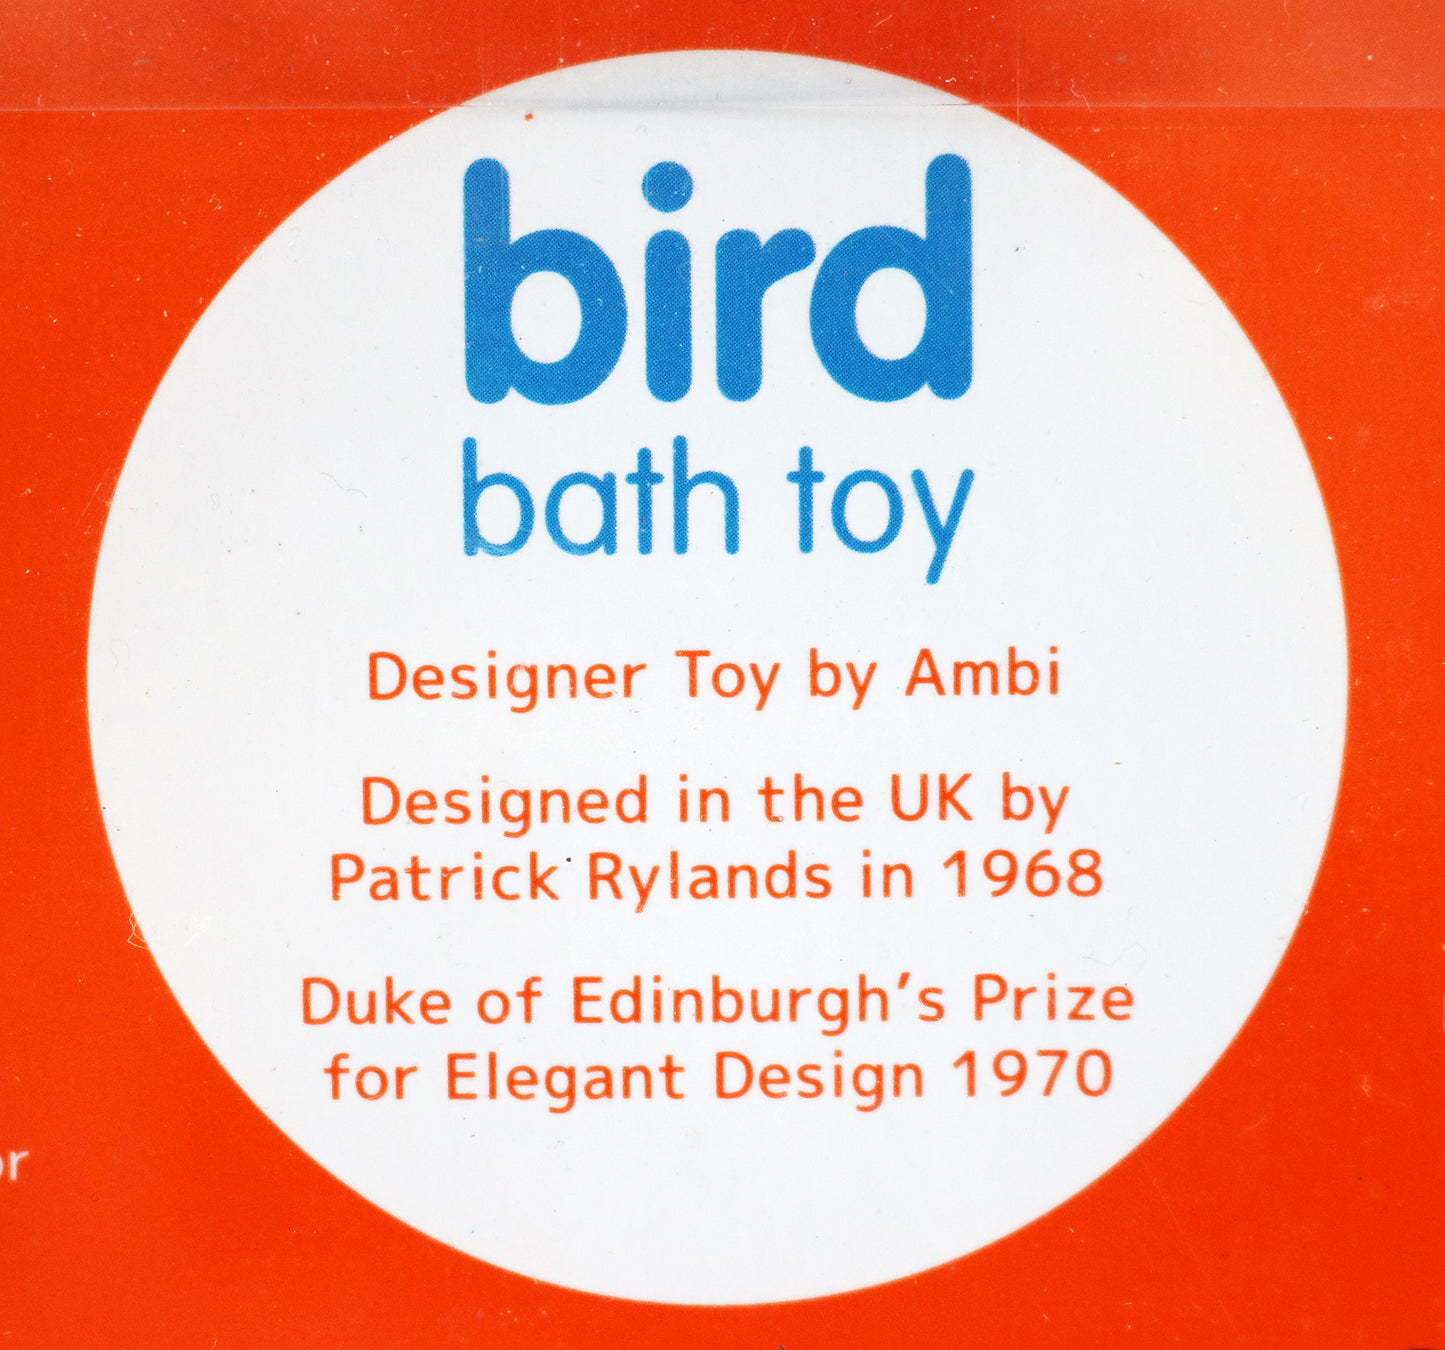 Retired - Collectable 1970s award-winning design from Patrick Rylands for Ambi Toys 2014 model